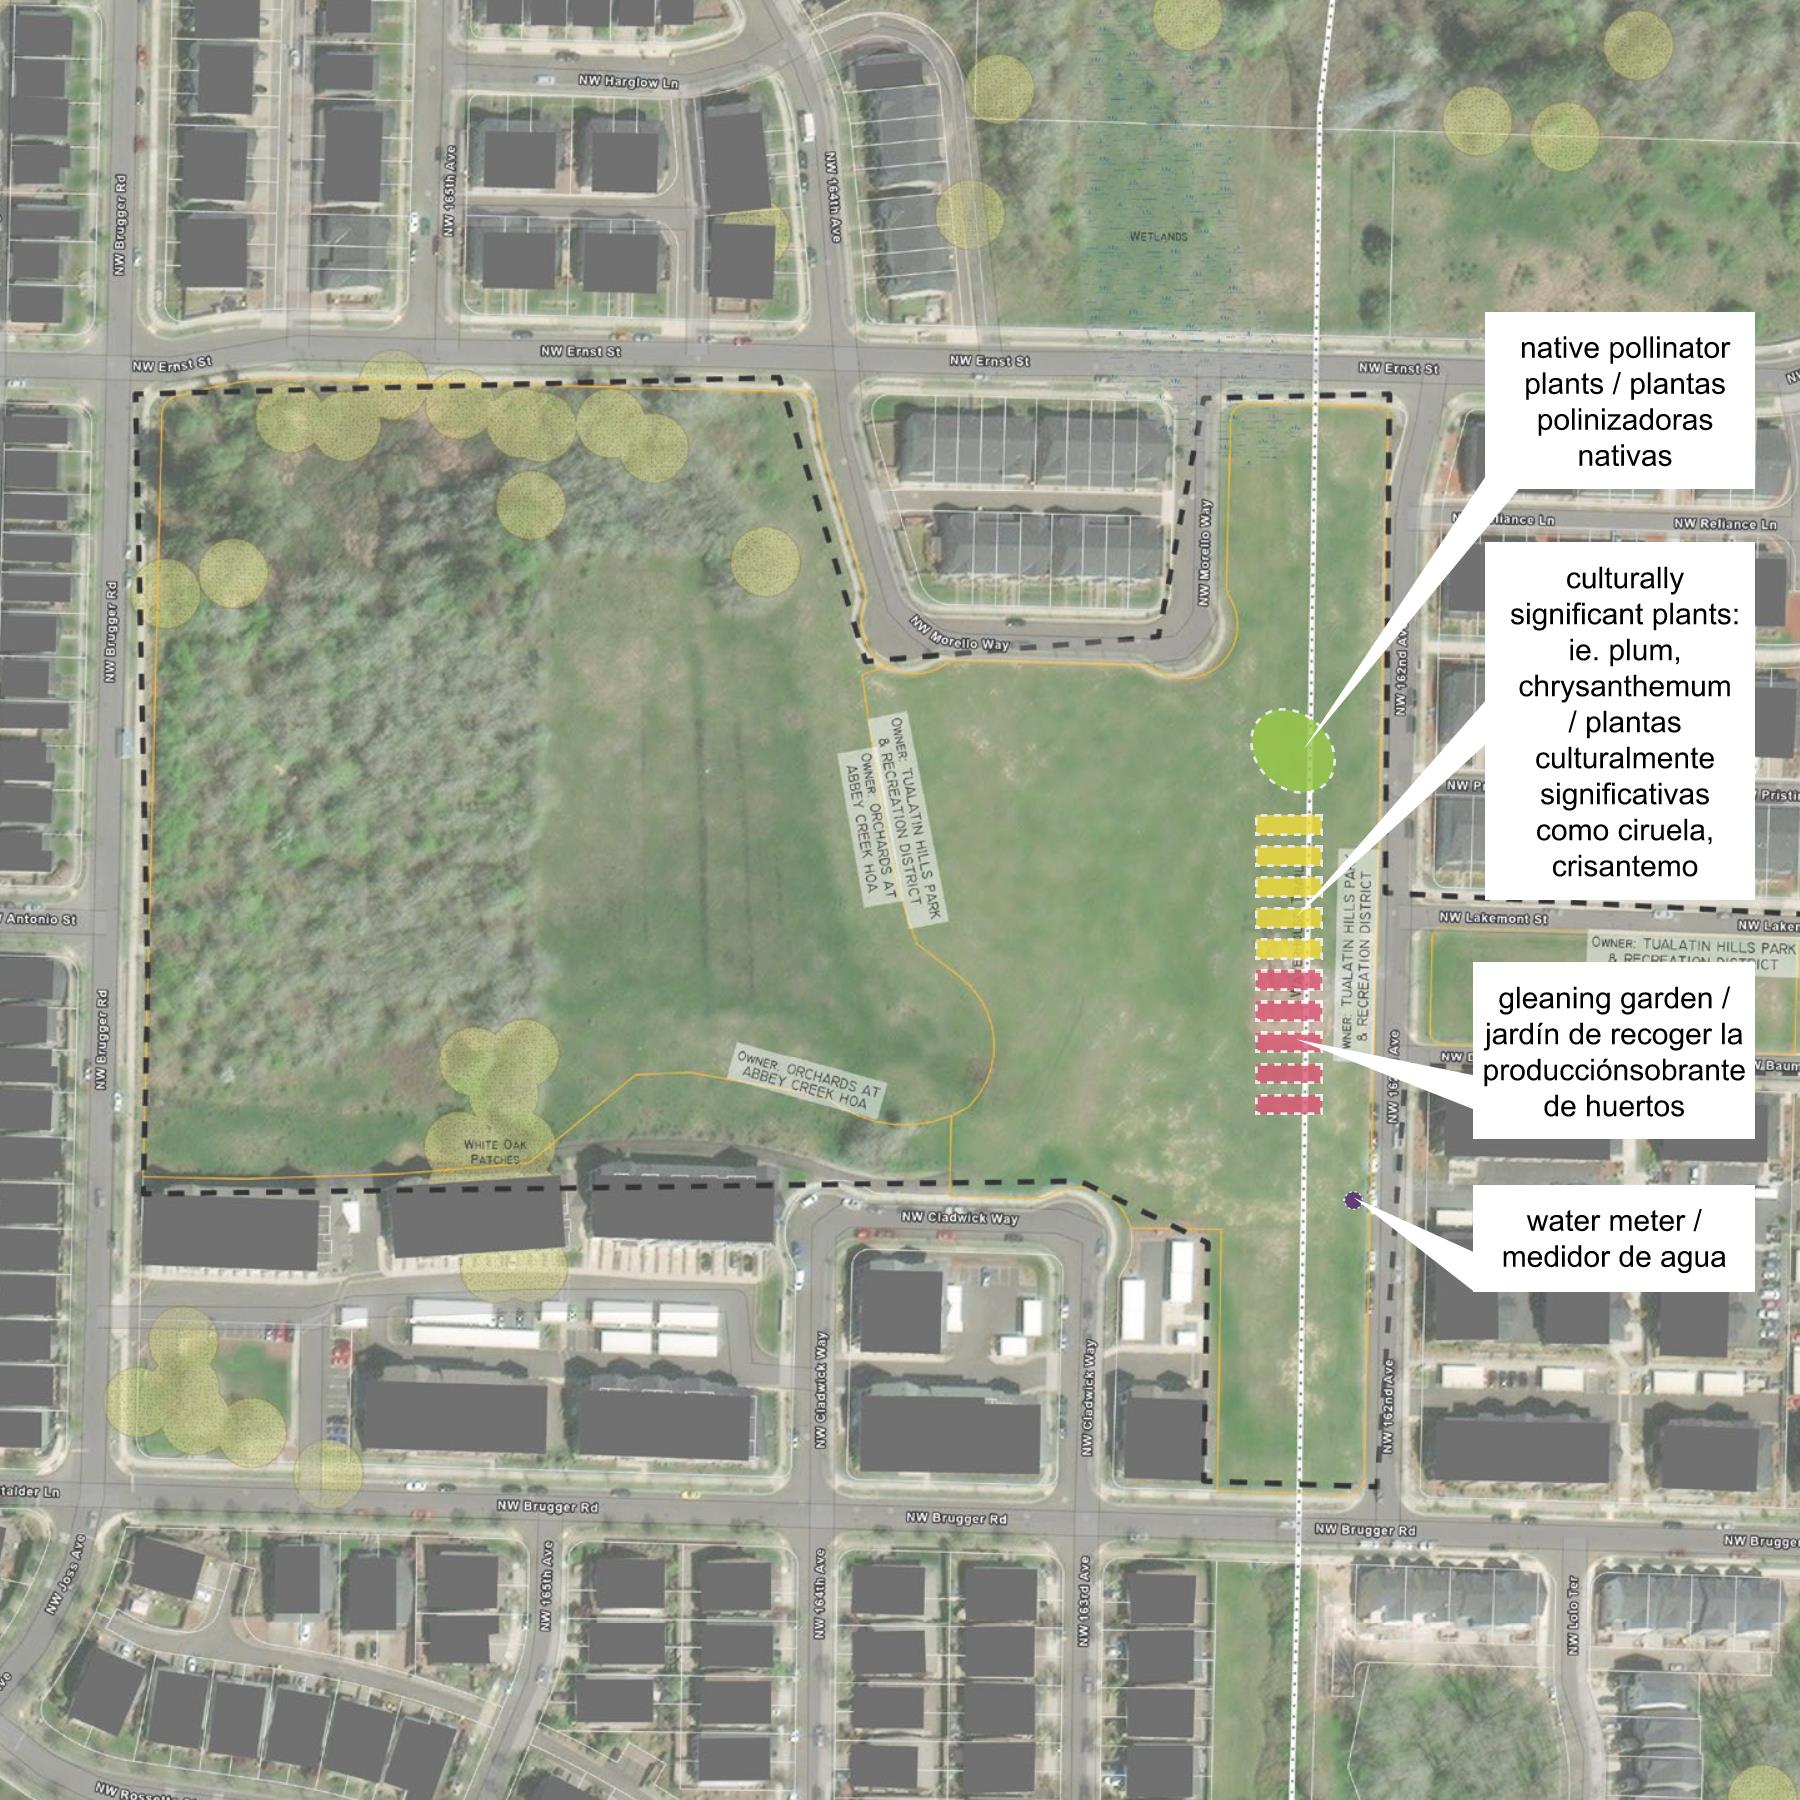 Image alt text: An Asian Produce gleaning garden is proposed for the eastern edge of the open field bookend by NW Ernst, NW 162nd, and NW Brugger. This garden will be an open resource to the surrounding community and include two sections, one for culturally significant and edible plants, as well as a second section for native pollinator plants. A new water meter will also be installed to irrigate this culturally specific garden.